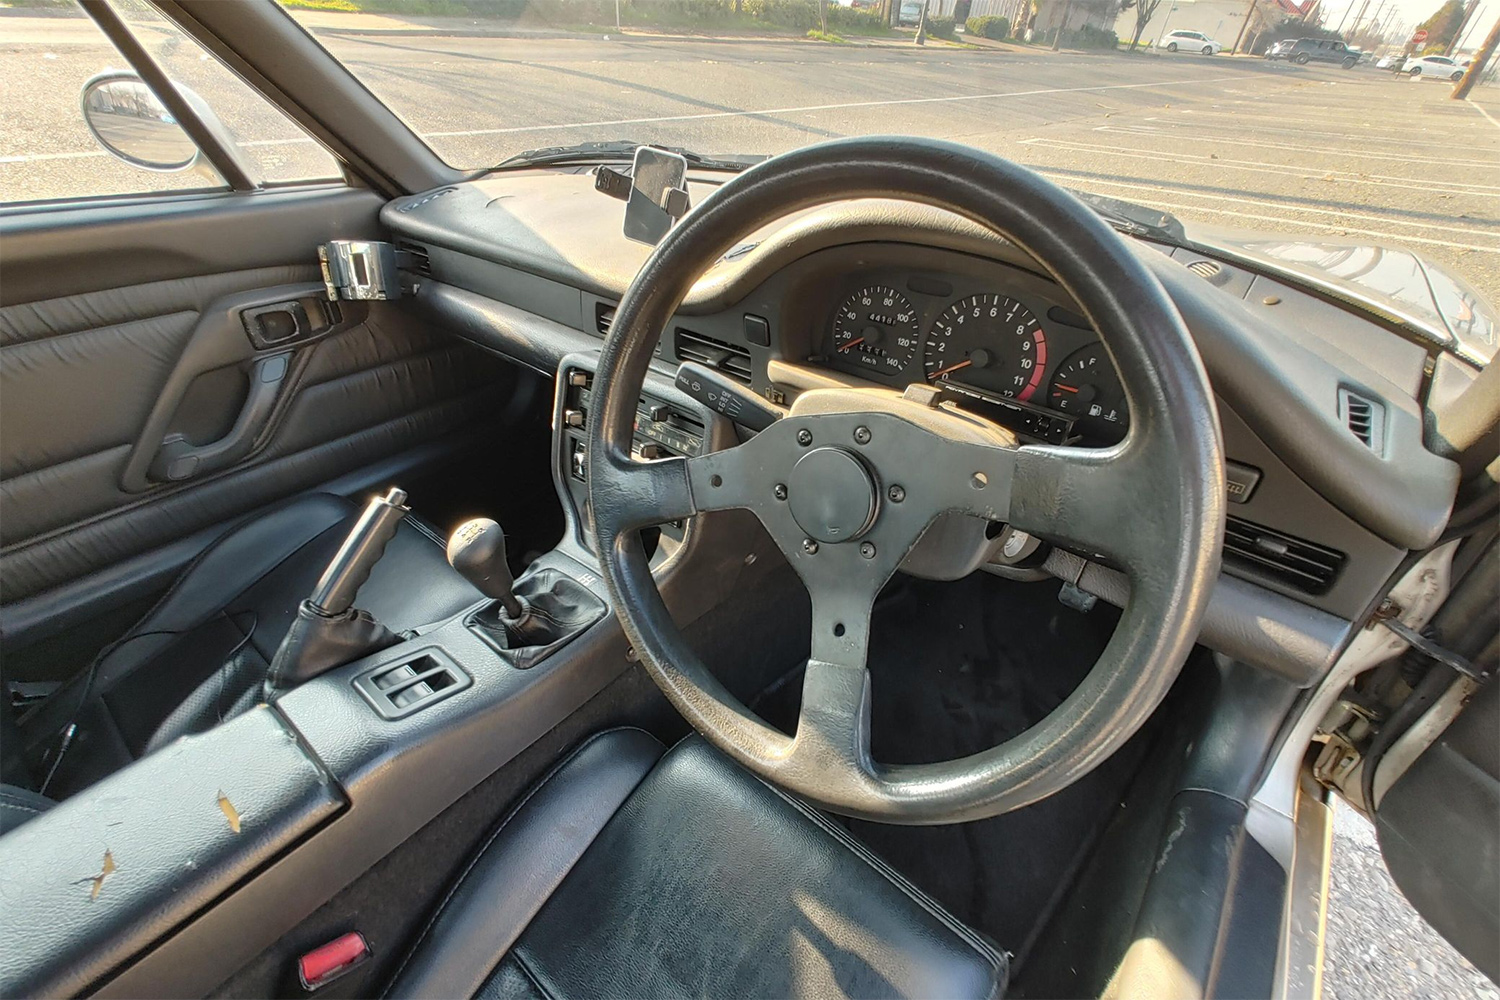 Interior of 1992 Suzuki Cappuccino sold on Cars and Bids for $6,800